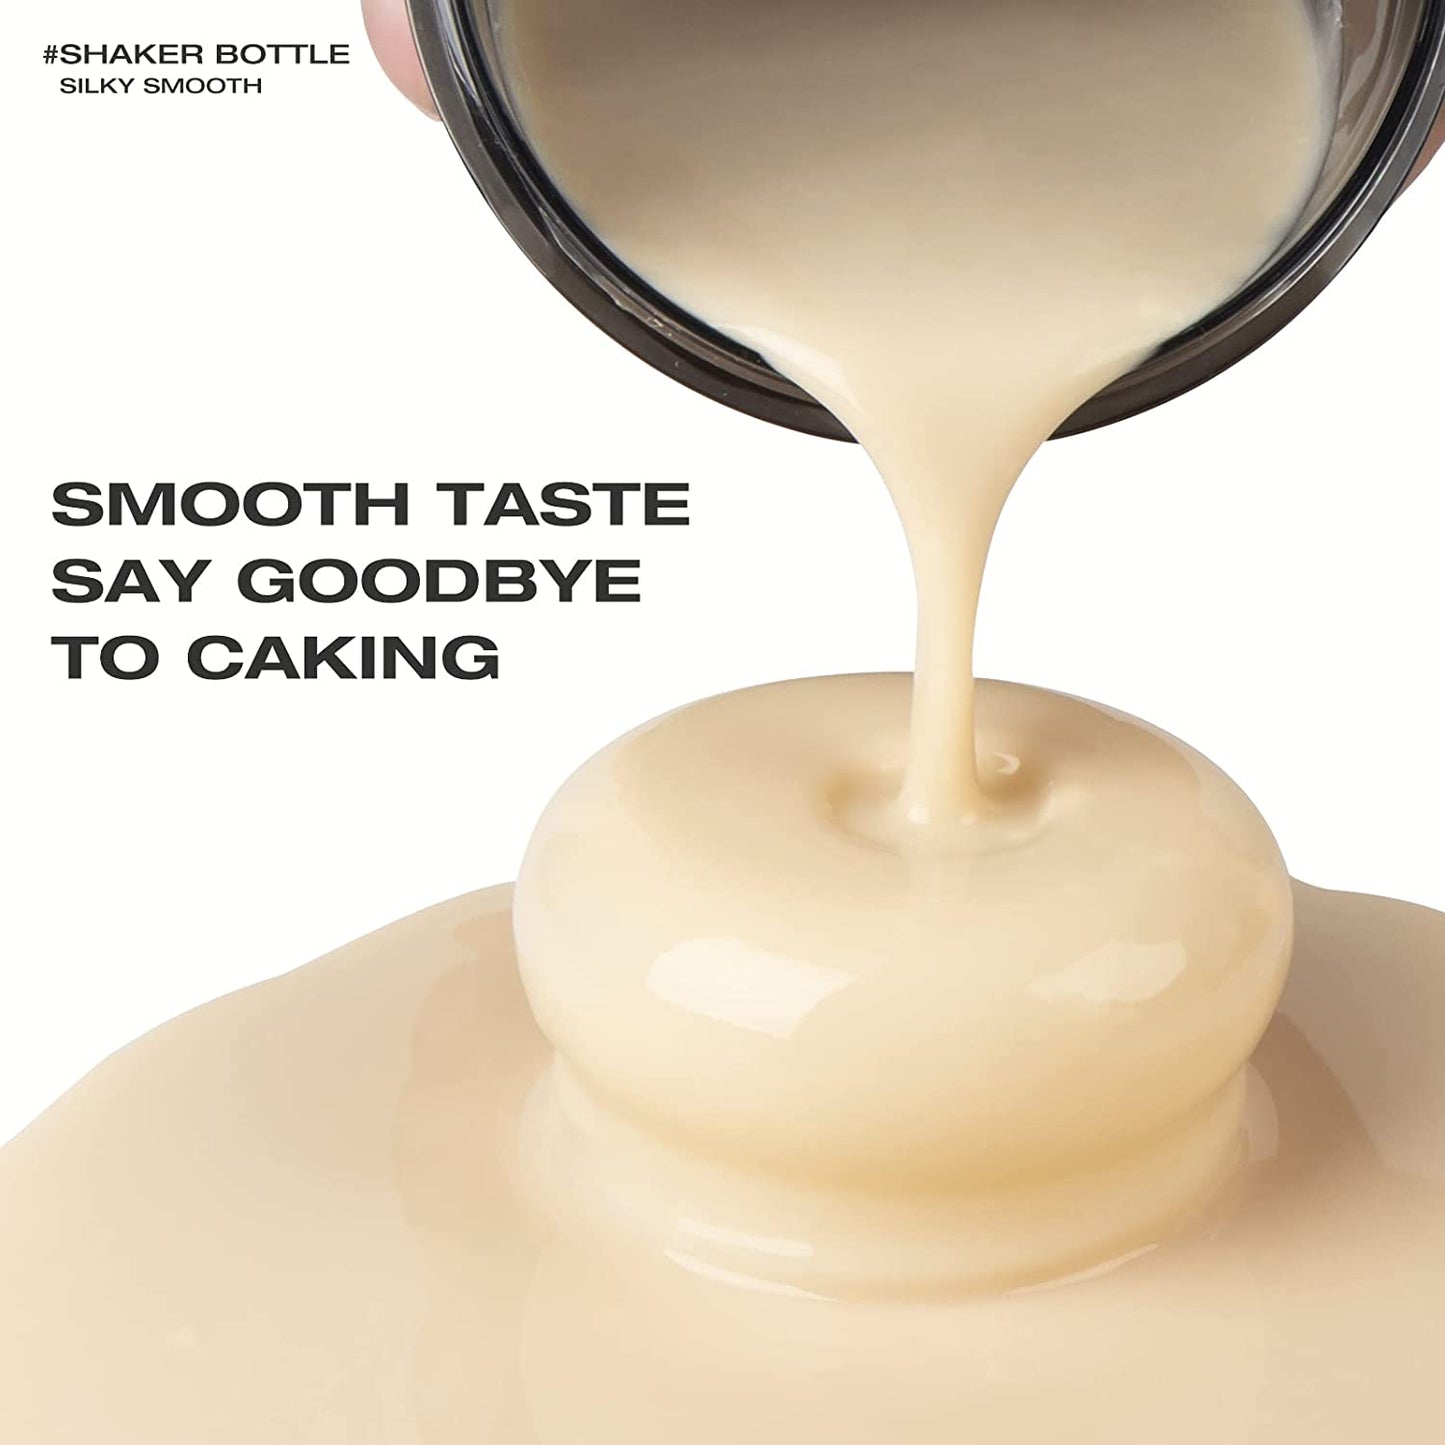 A protein shaker bottle pouring a ready made, smooth protein shake onto a white surface. There is text which reads "Smooth taste say goodbye to caking"